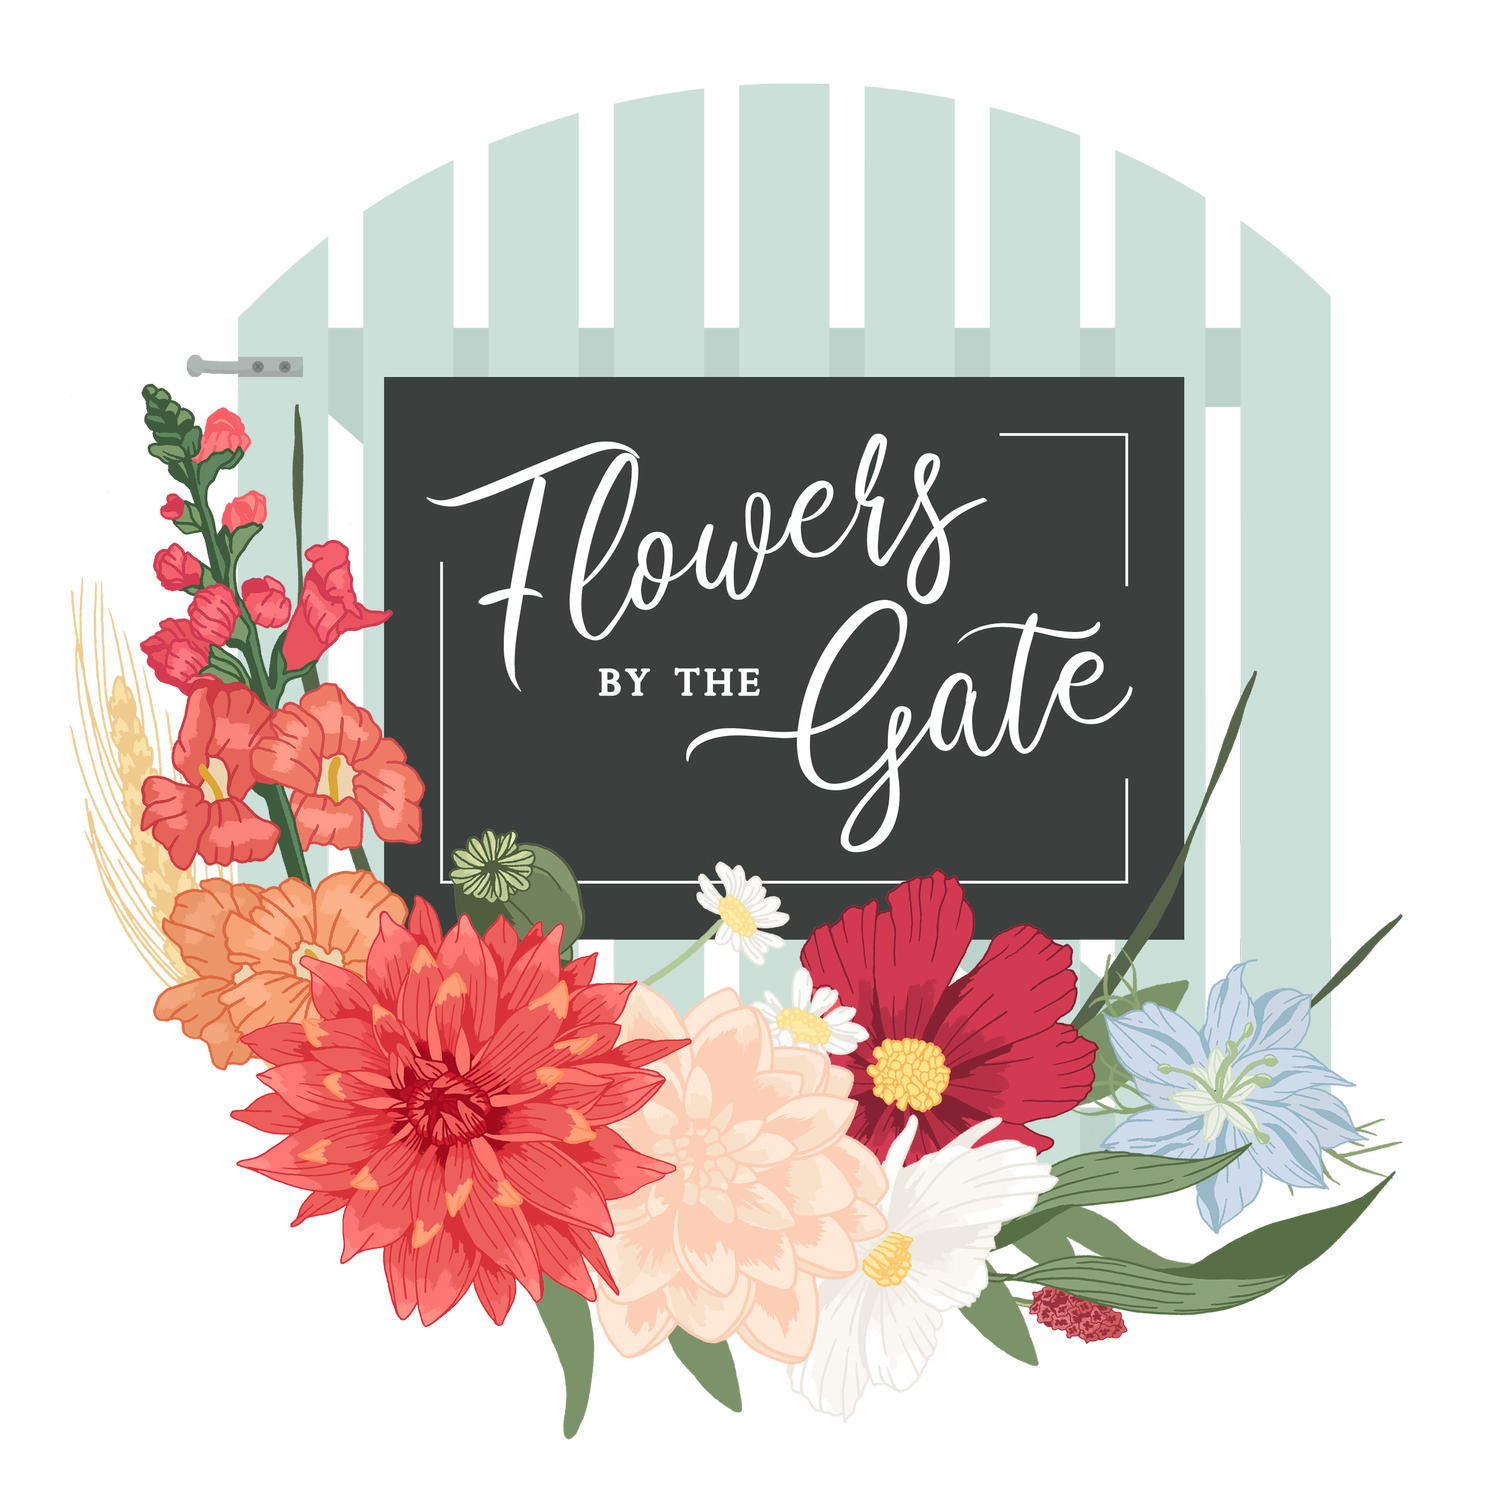 Flowers by the Gate